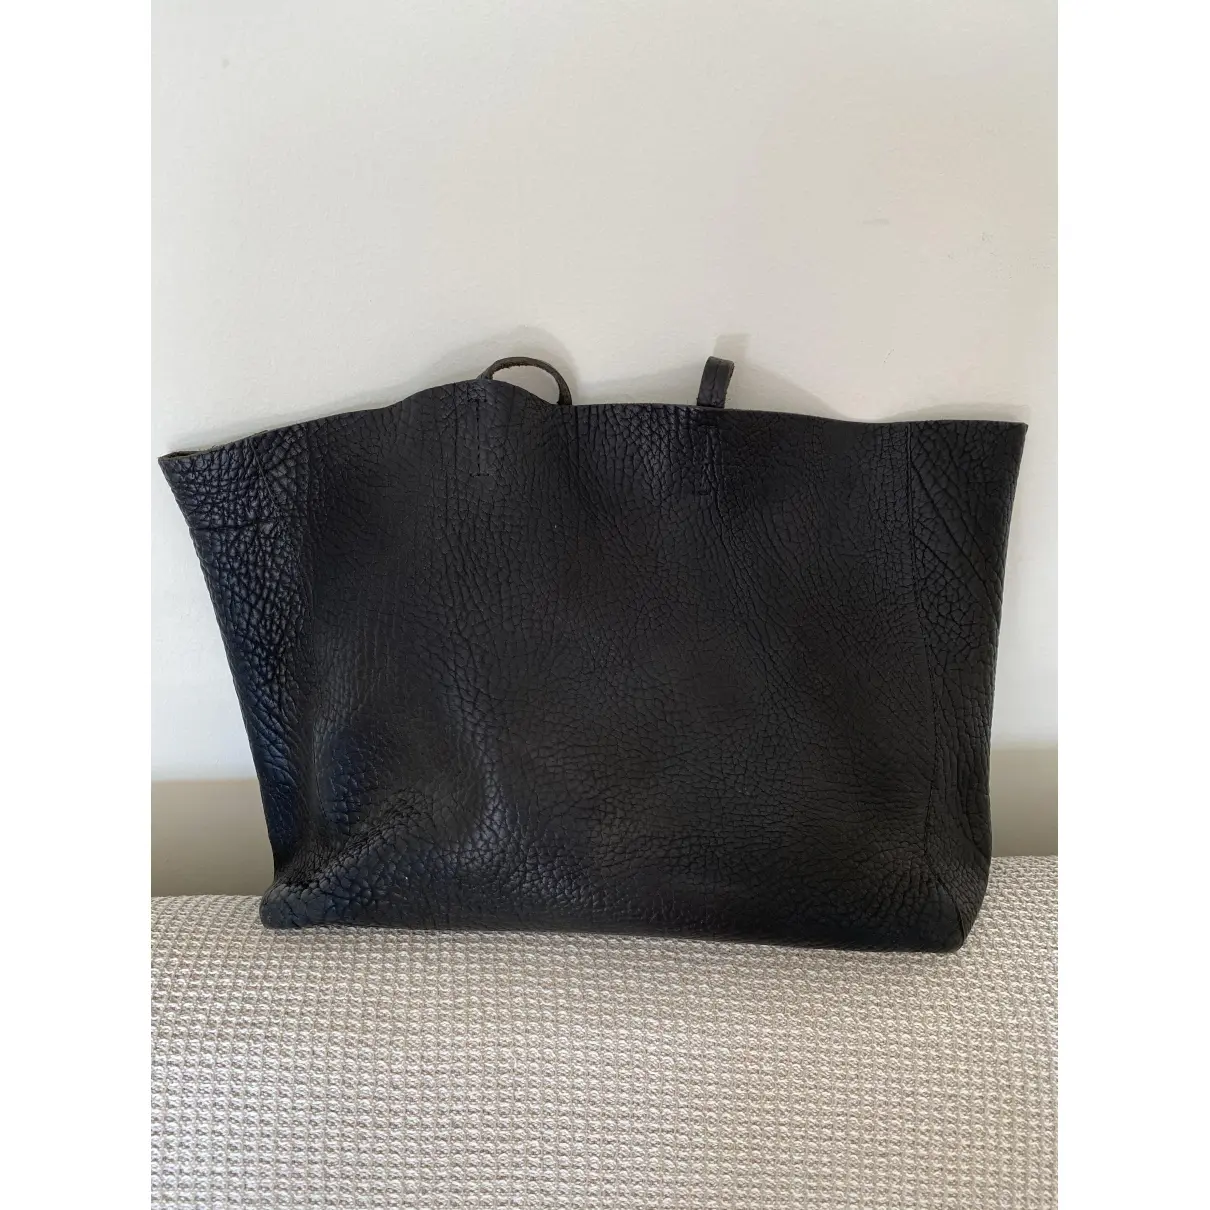 Buy Orciani Leather tote online